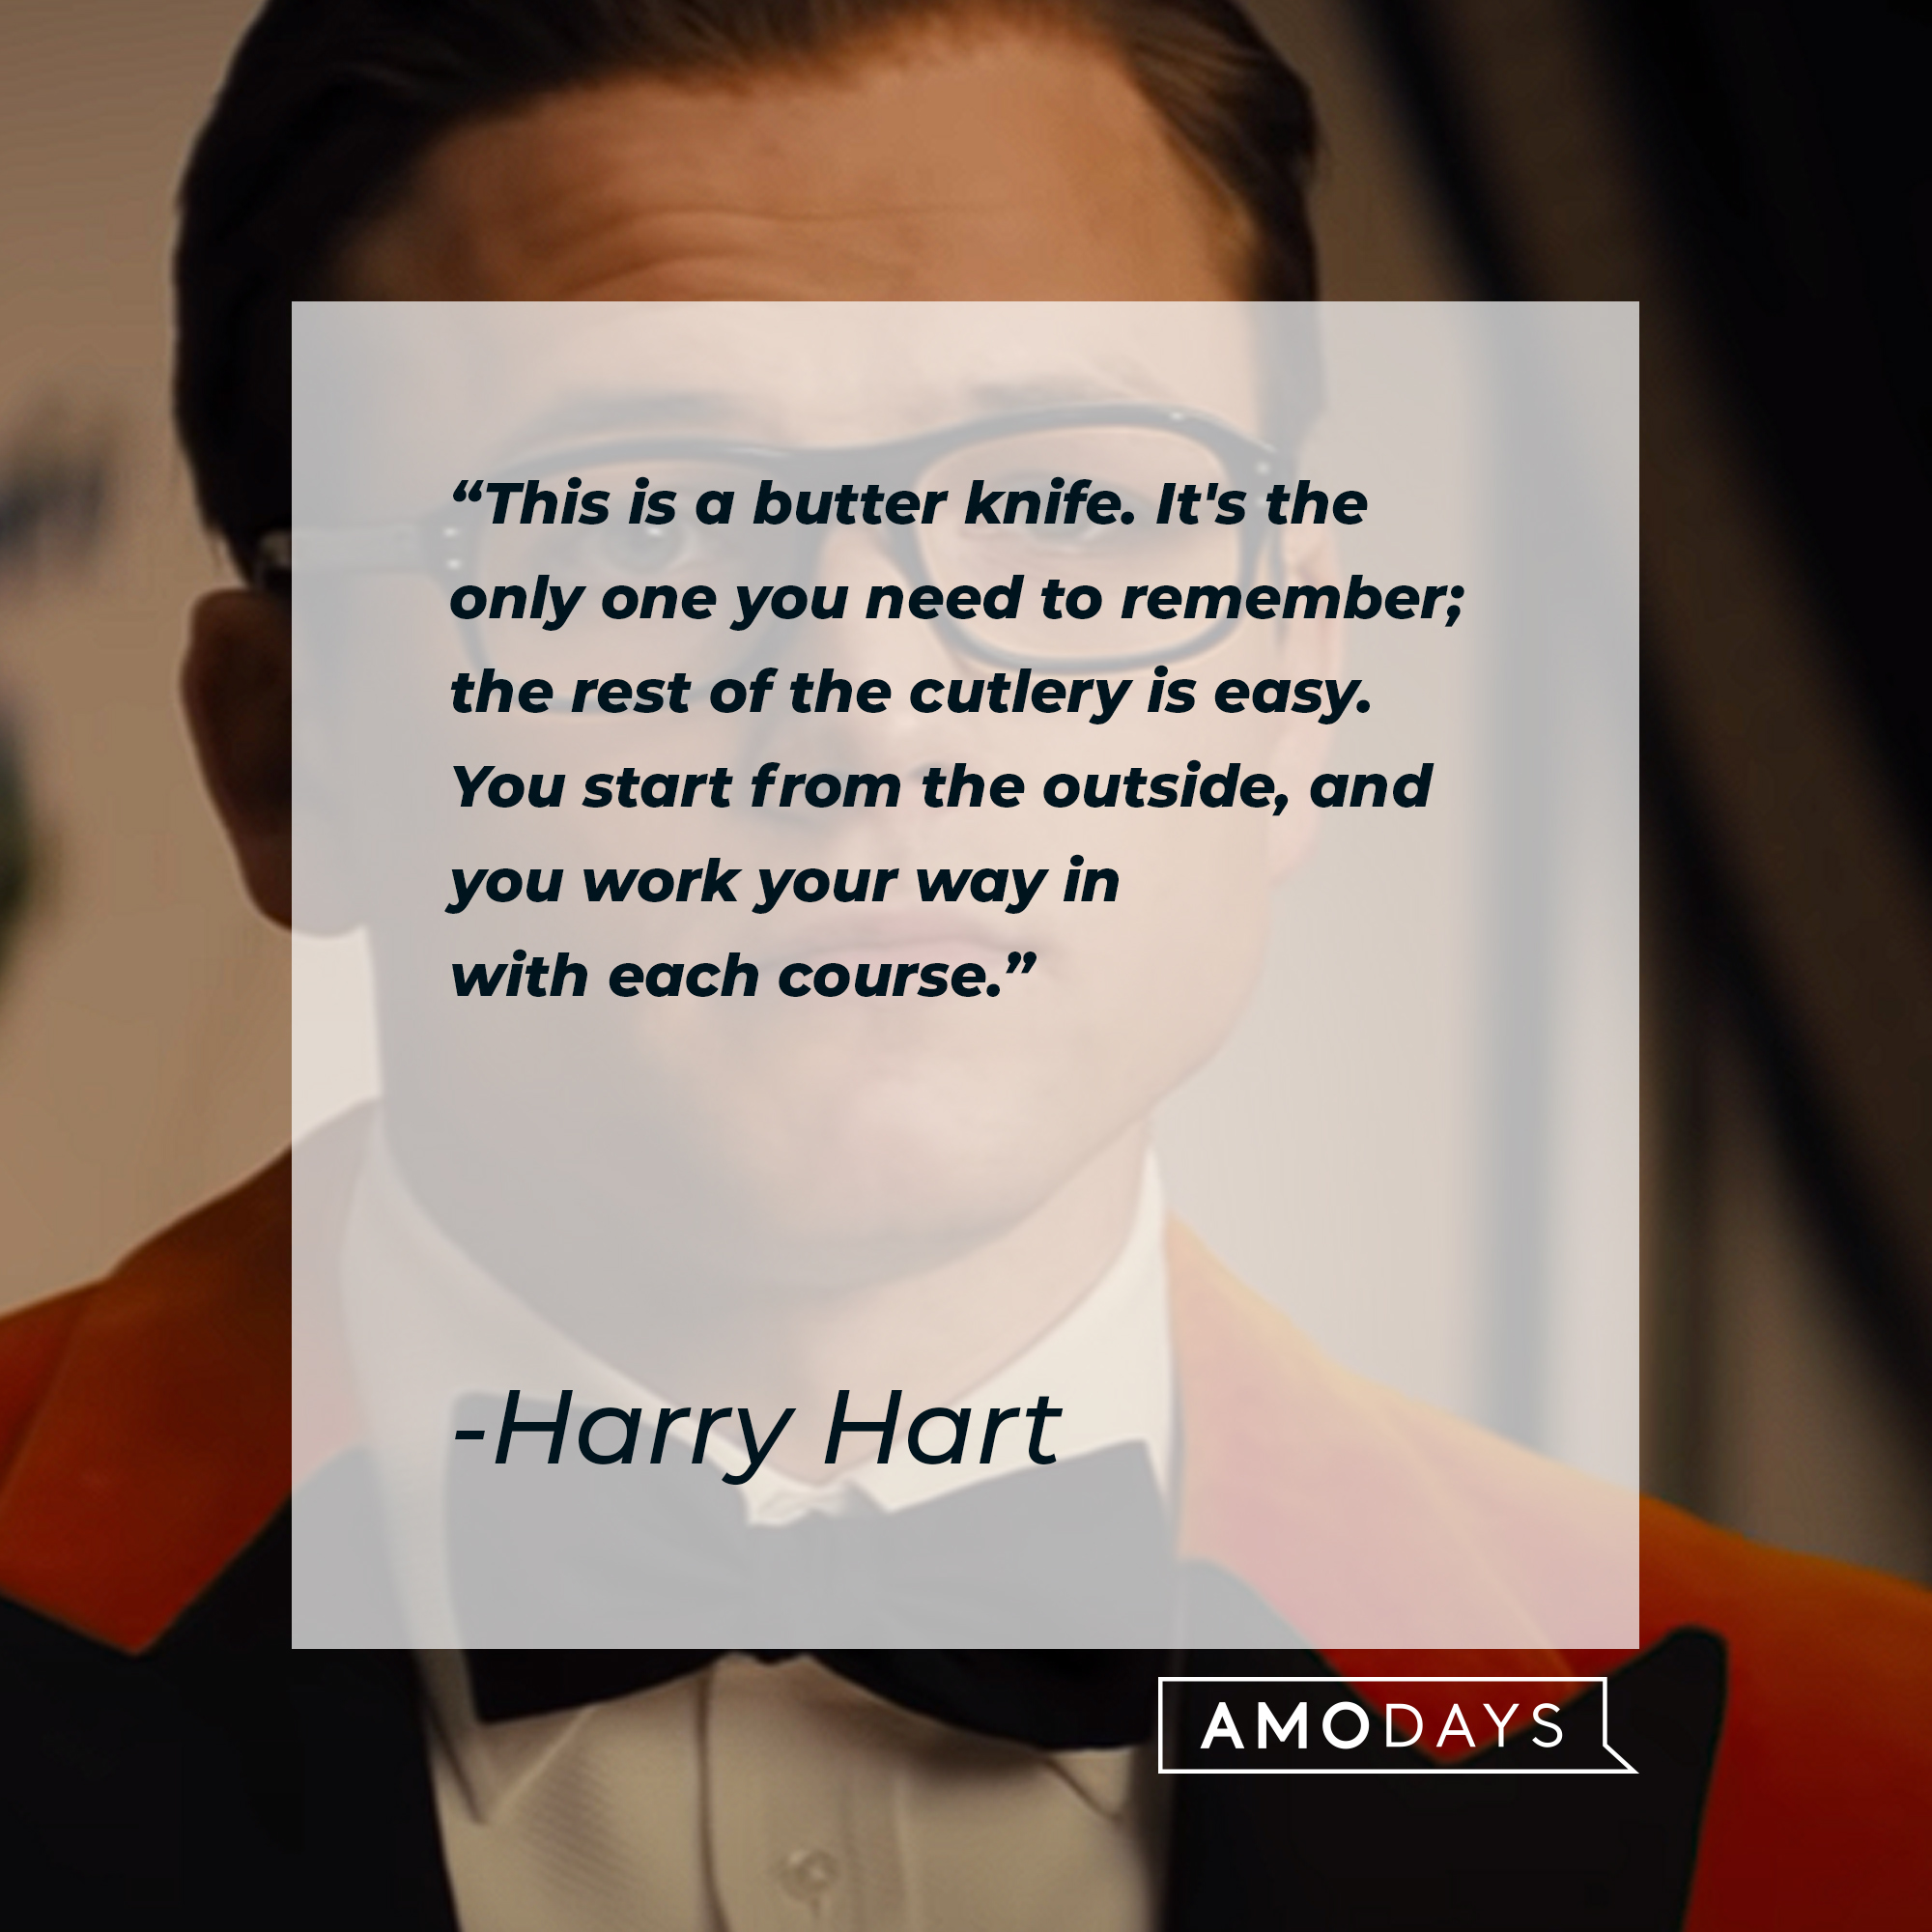 Harry Hart's quote: "This is a butter knife. It's the only one you need to remember; the rest of the cutlery is easy. You start from the outside, and you work your way in with each course." | Image: YouTube / 20thCenturyStudios